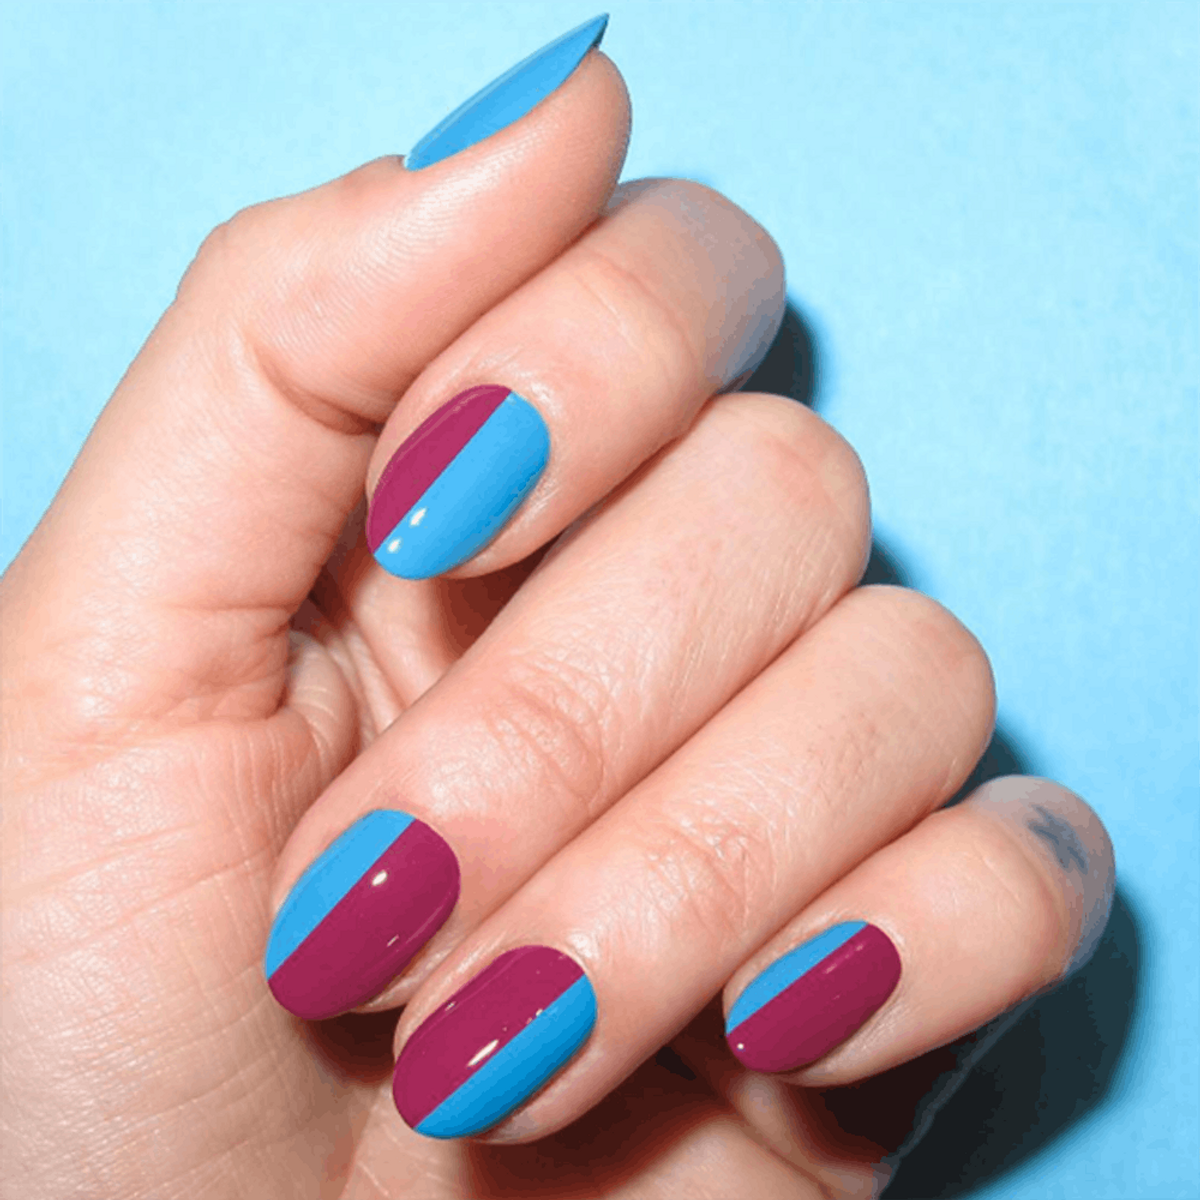 These Are the Best Nail Color Combos RN, According to Instagram